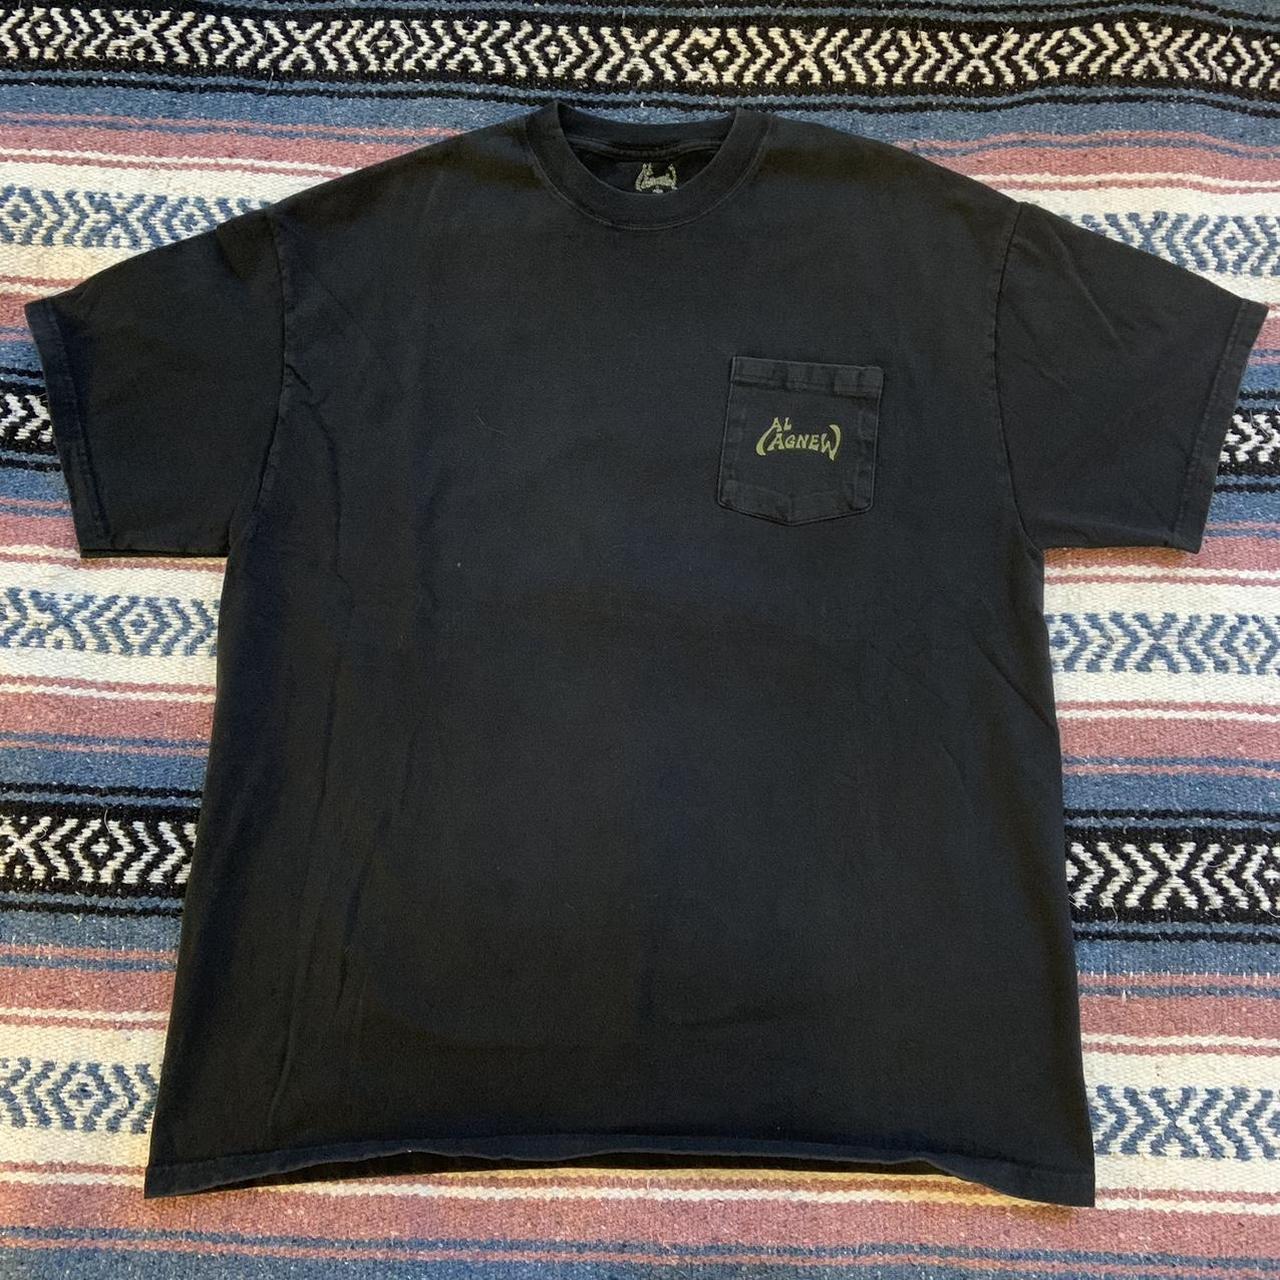 Black Al Agnew Graphic T-Shirt Thrifted but - Depop